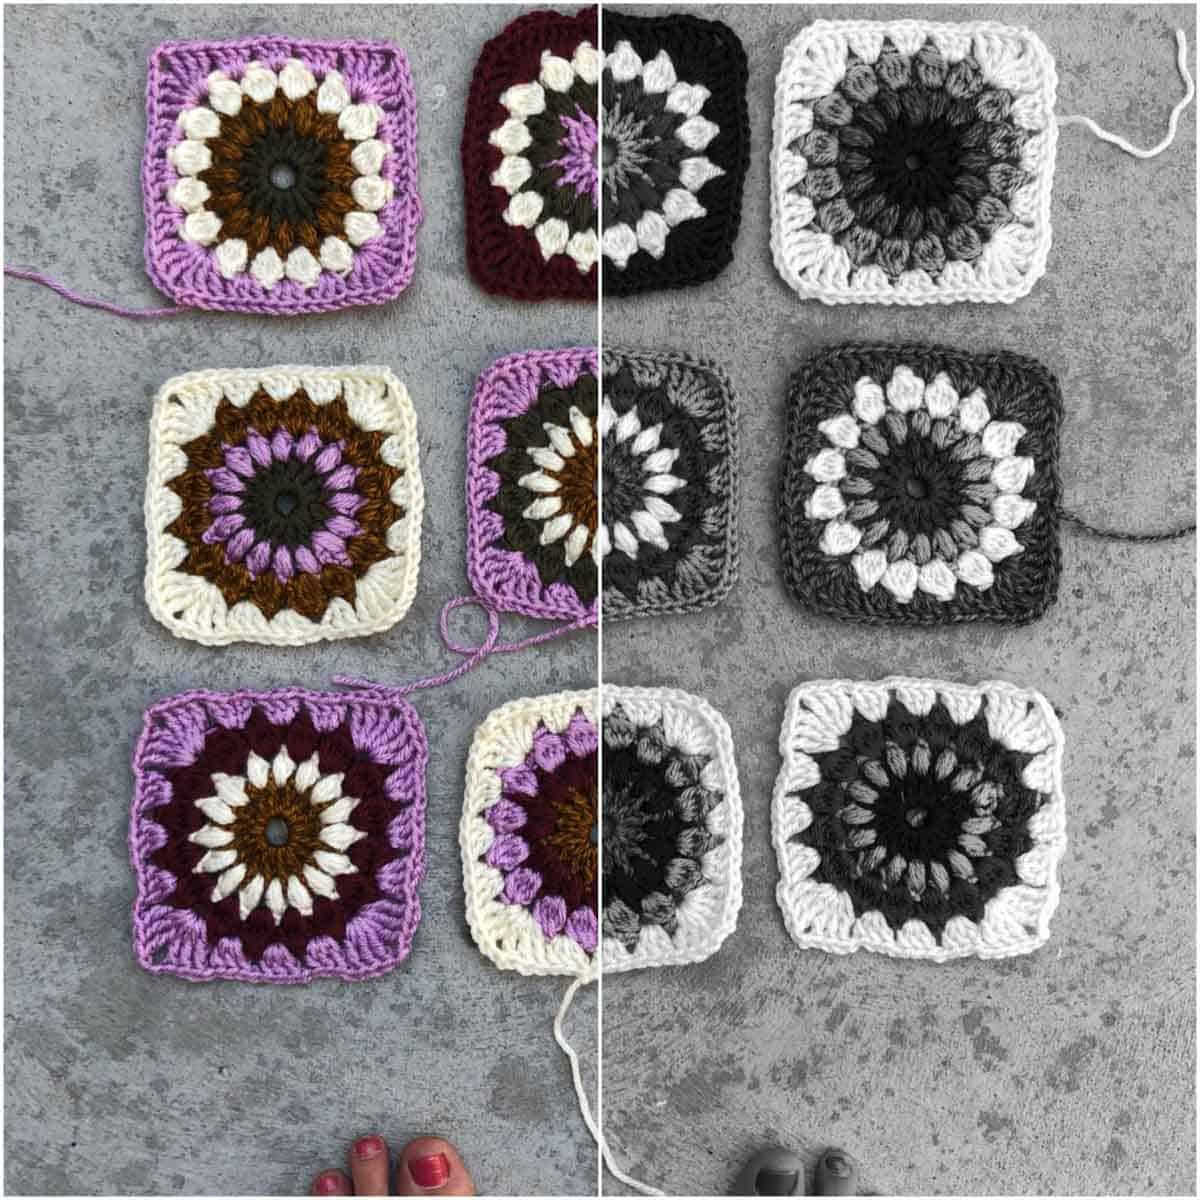 Crochet granny squares divided in half. One side of photo is in color and the other side is black and white. This is a trick for choosing yarn colors.